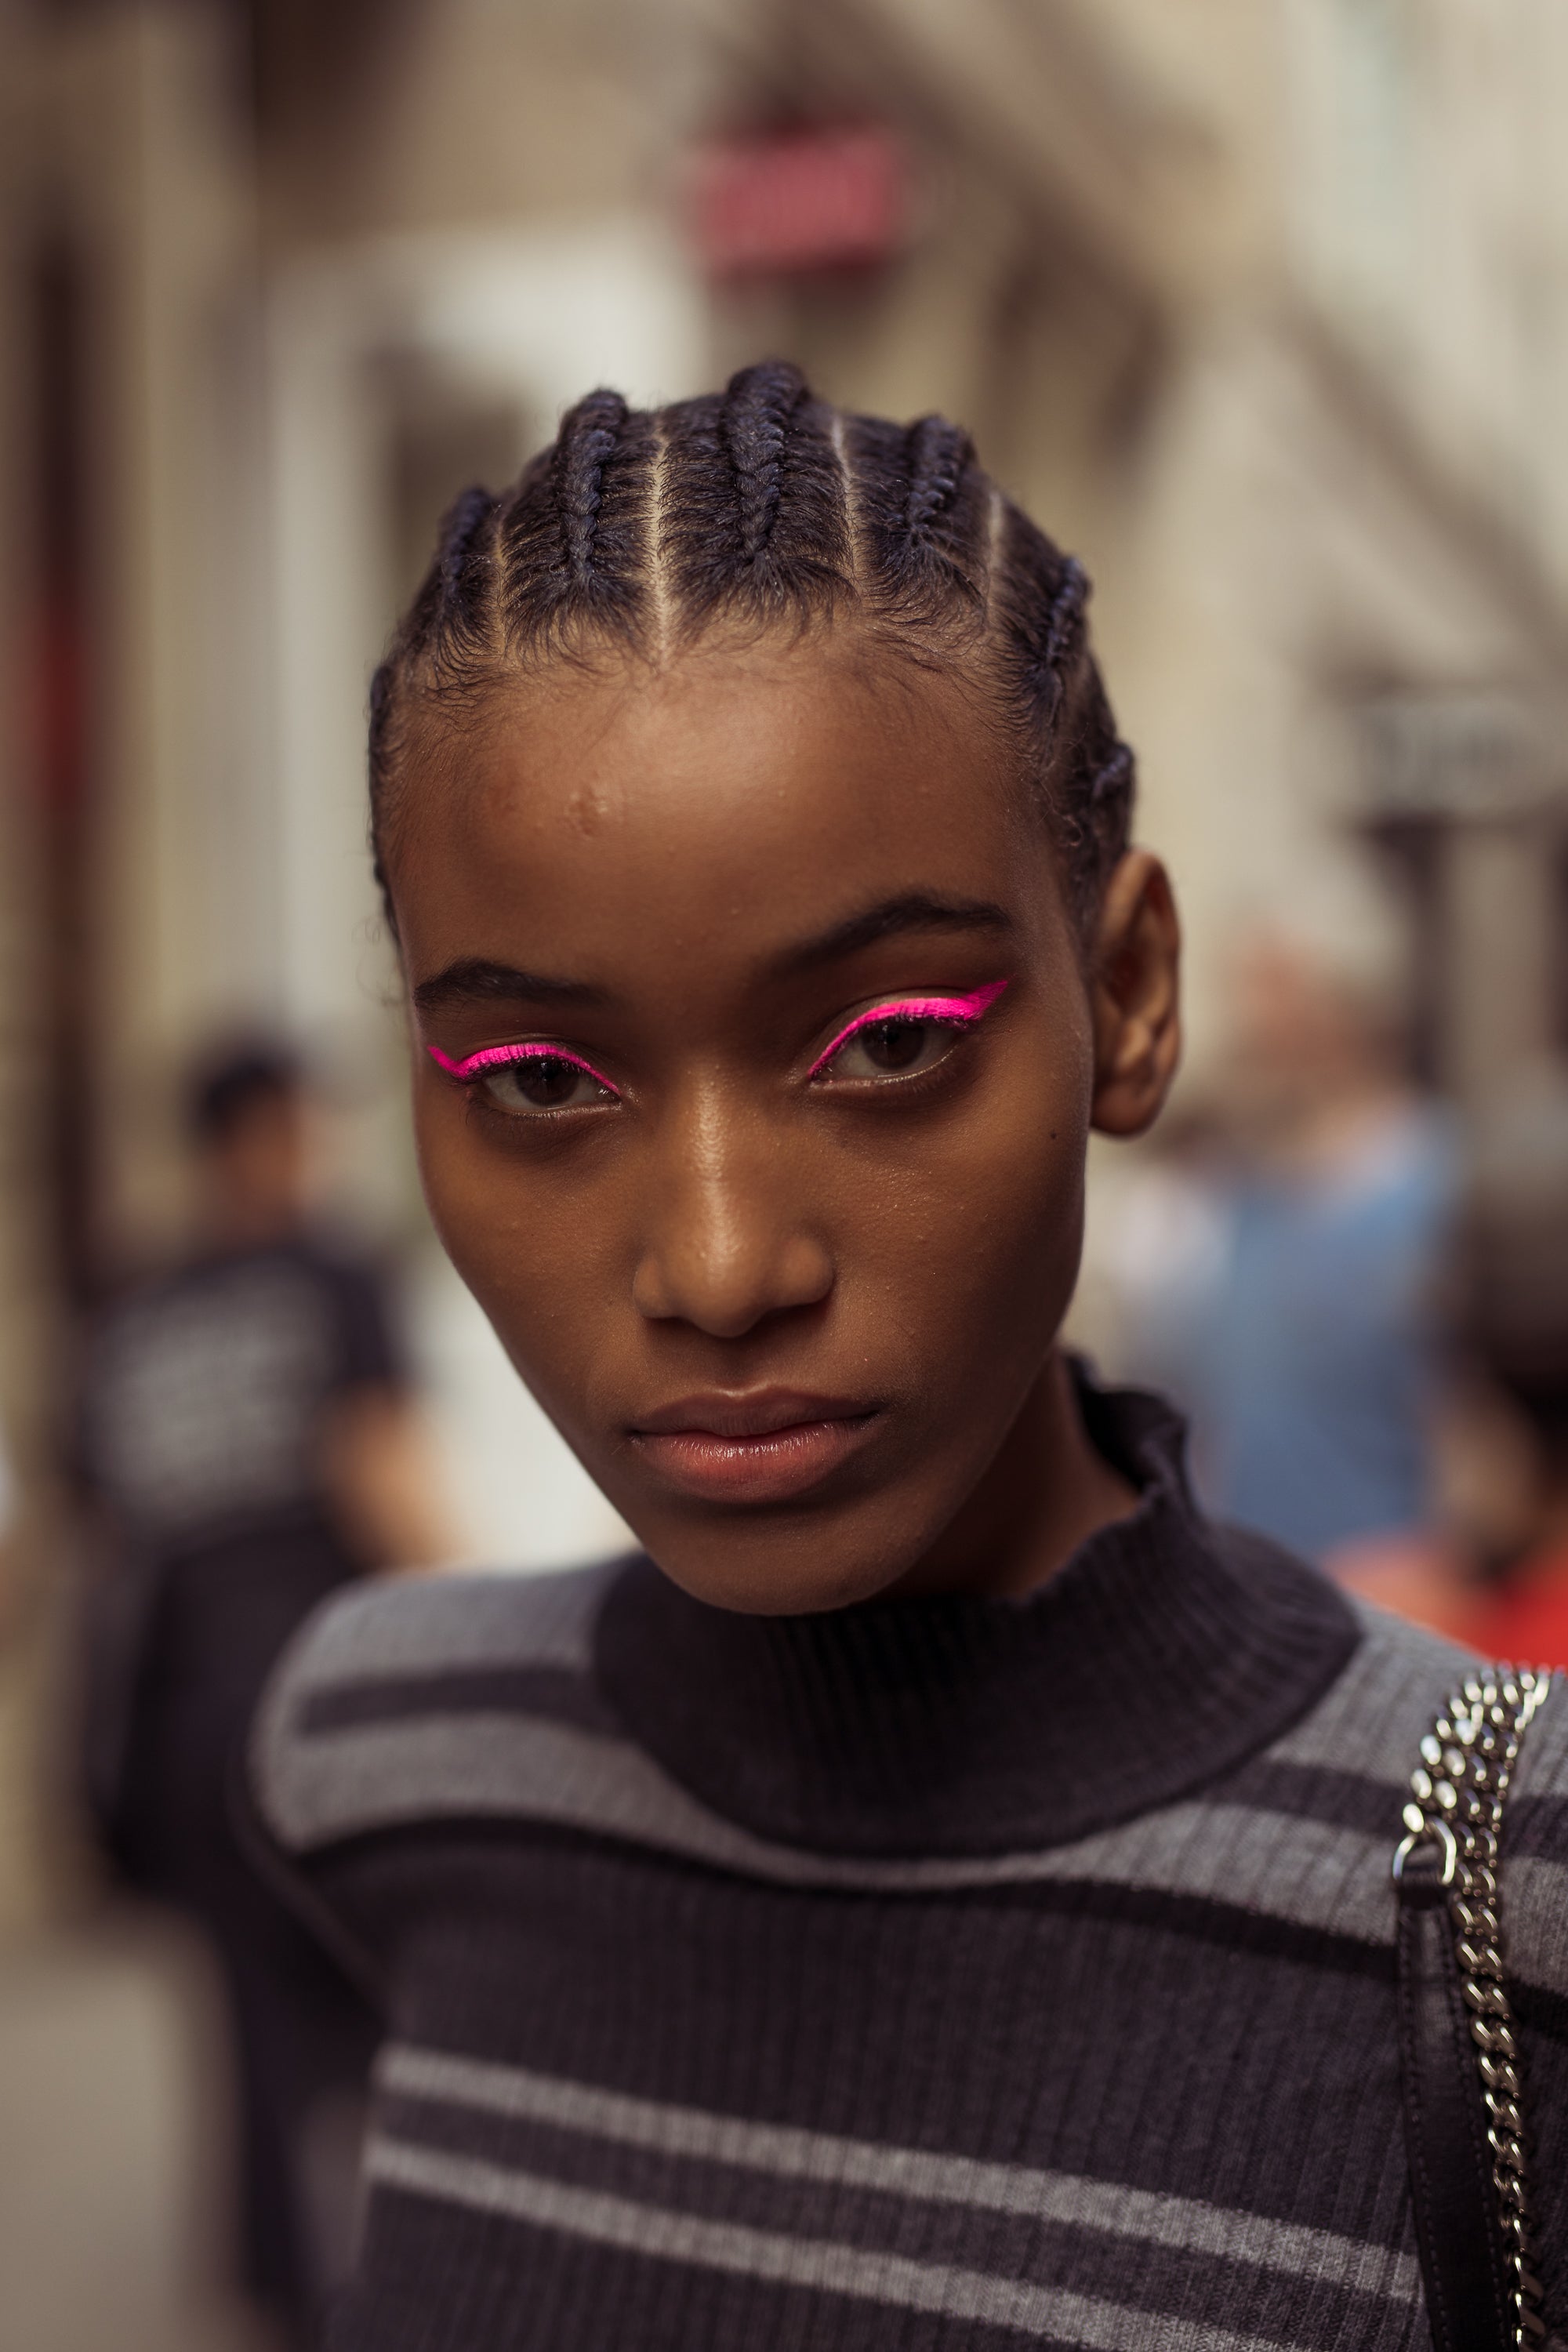 Braids Were The Biggest Hair Trend At NYFW